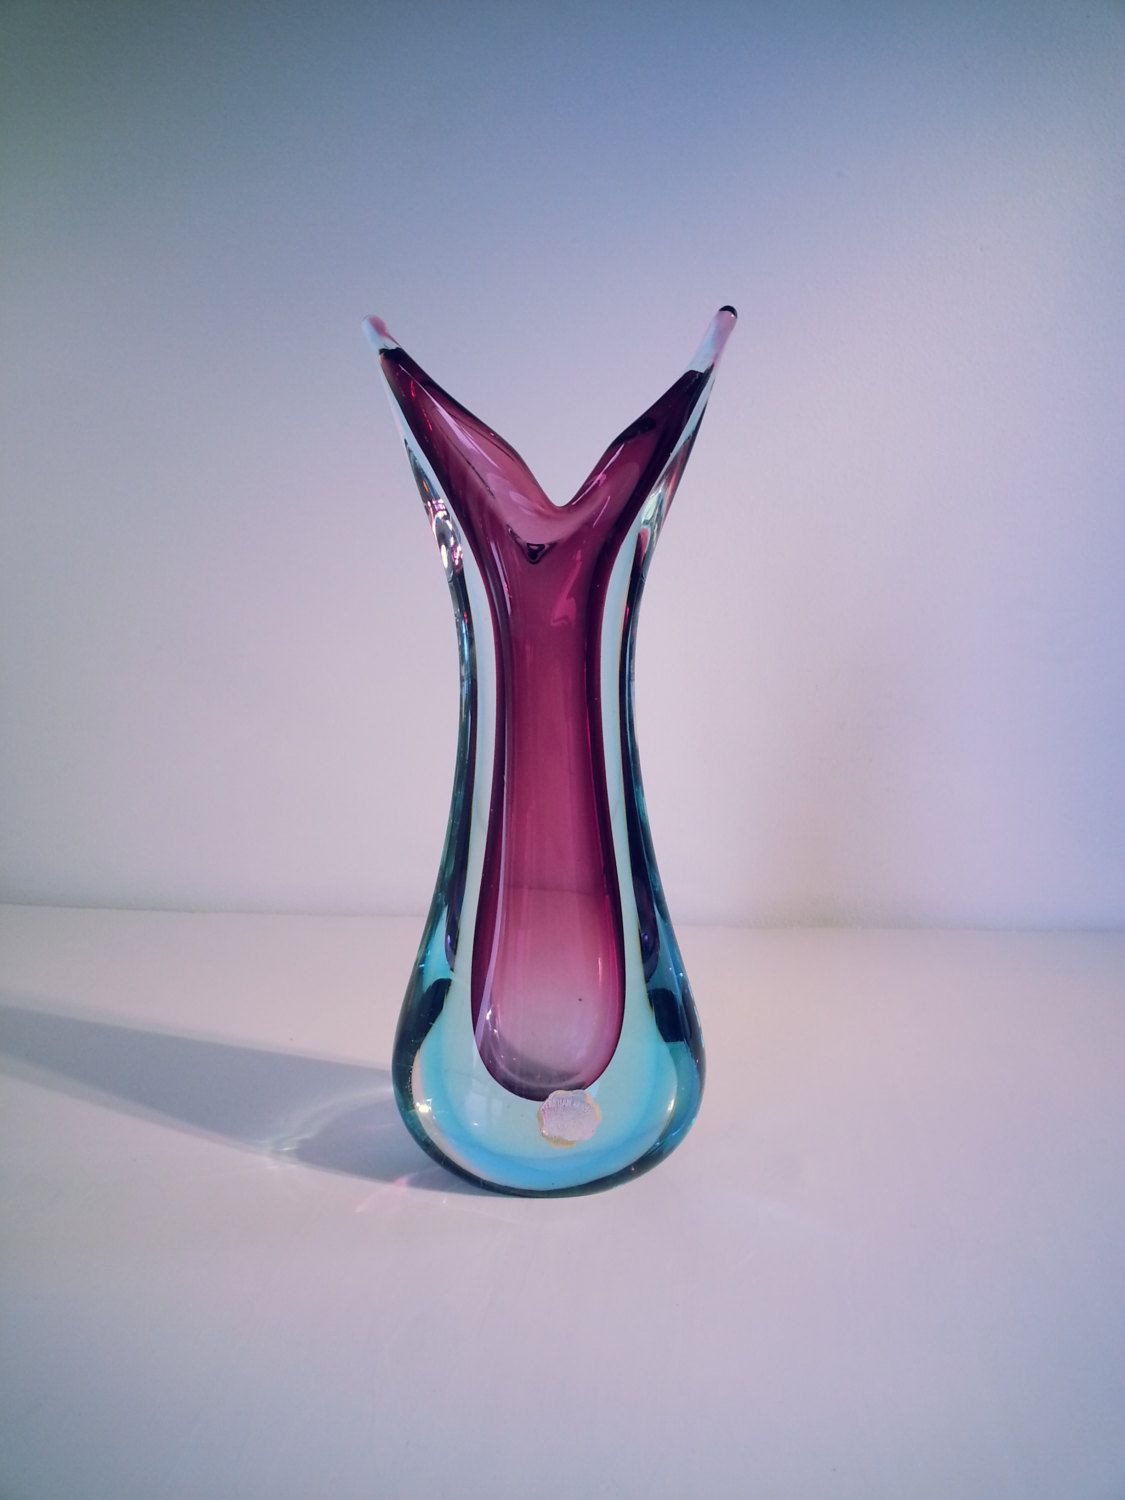 beautiful colored glass vases of murano sommerso genuine venetian glass 1950s 1960s purple blue pertaining to murano sommerso genuine venetian glass 1950s 1960s purple blue glass vase pulled design vase made in italy by fcollectables on etsy